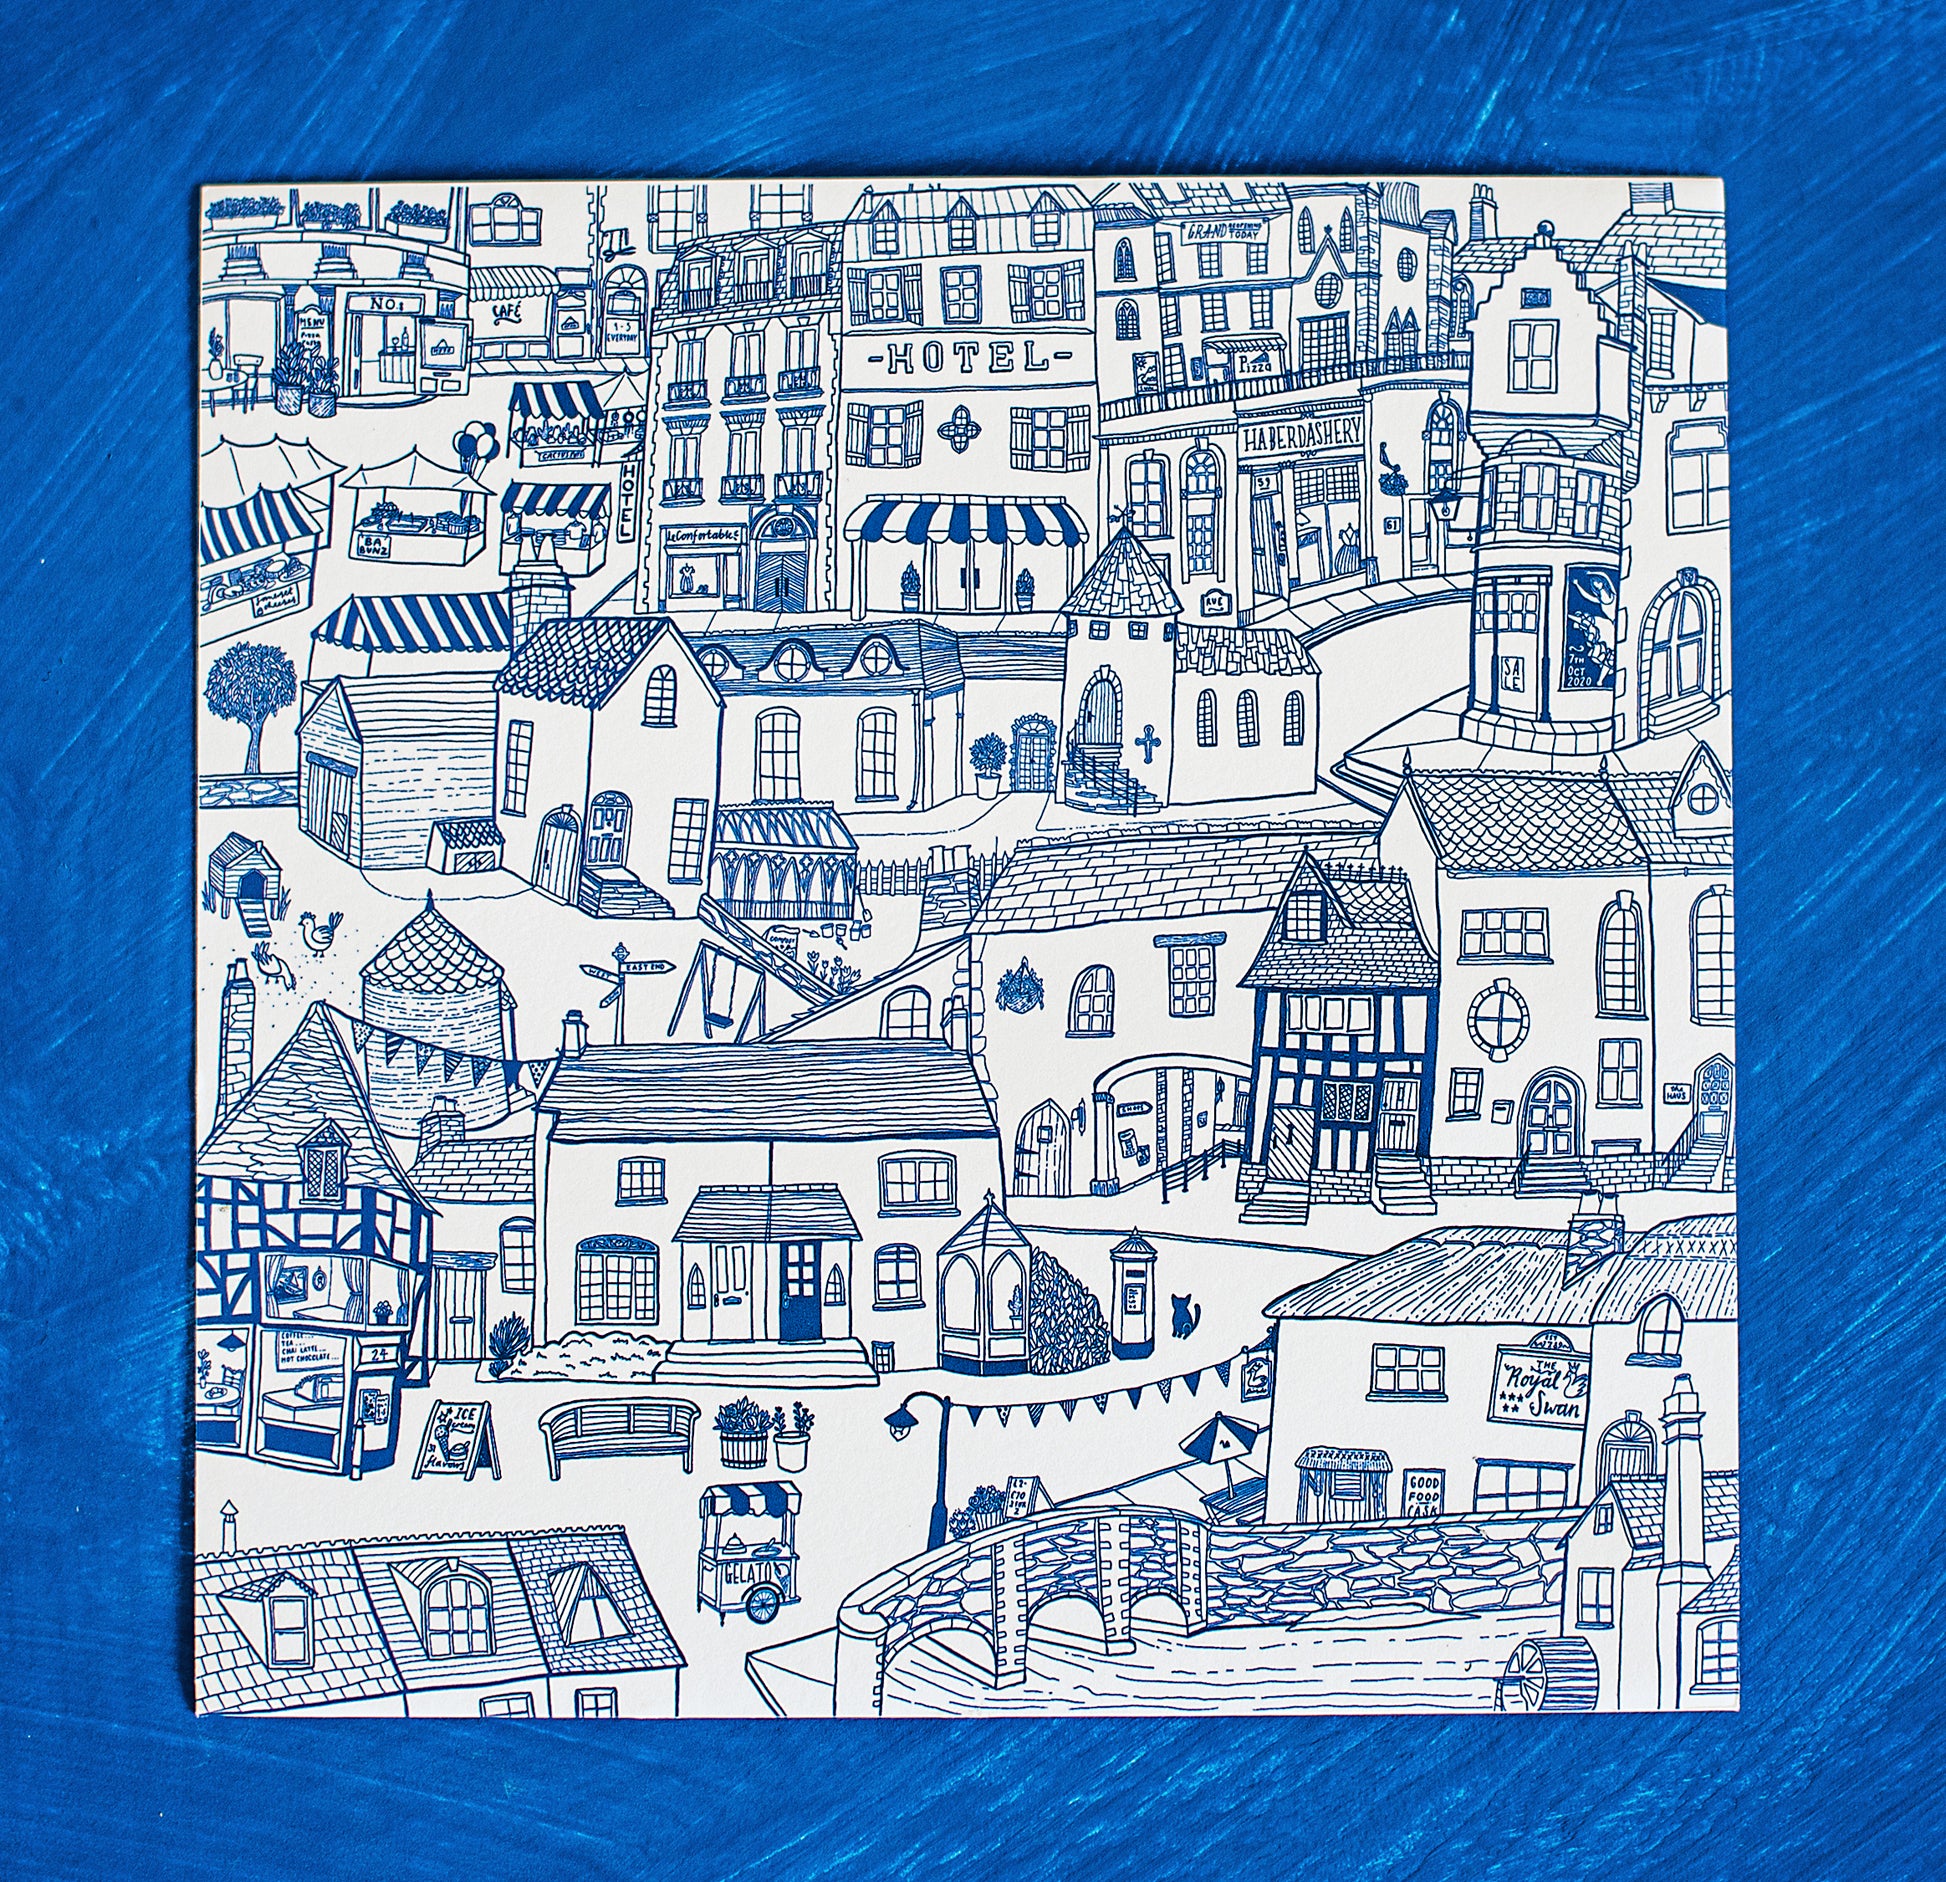 Unframed flatlay of the blue detailed illustration of a charming town scene.